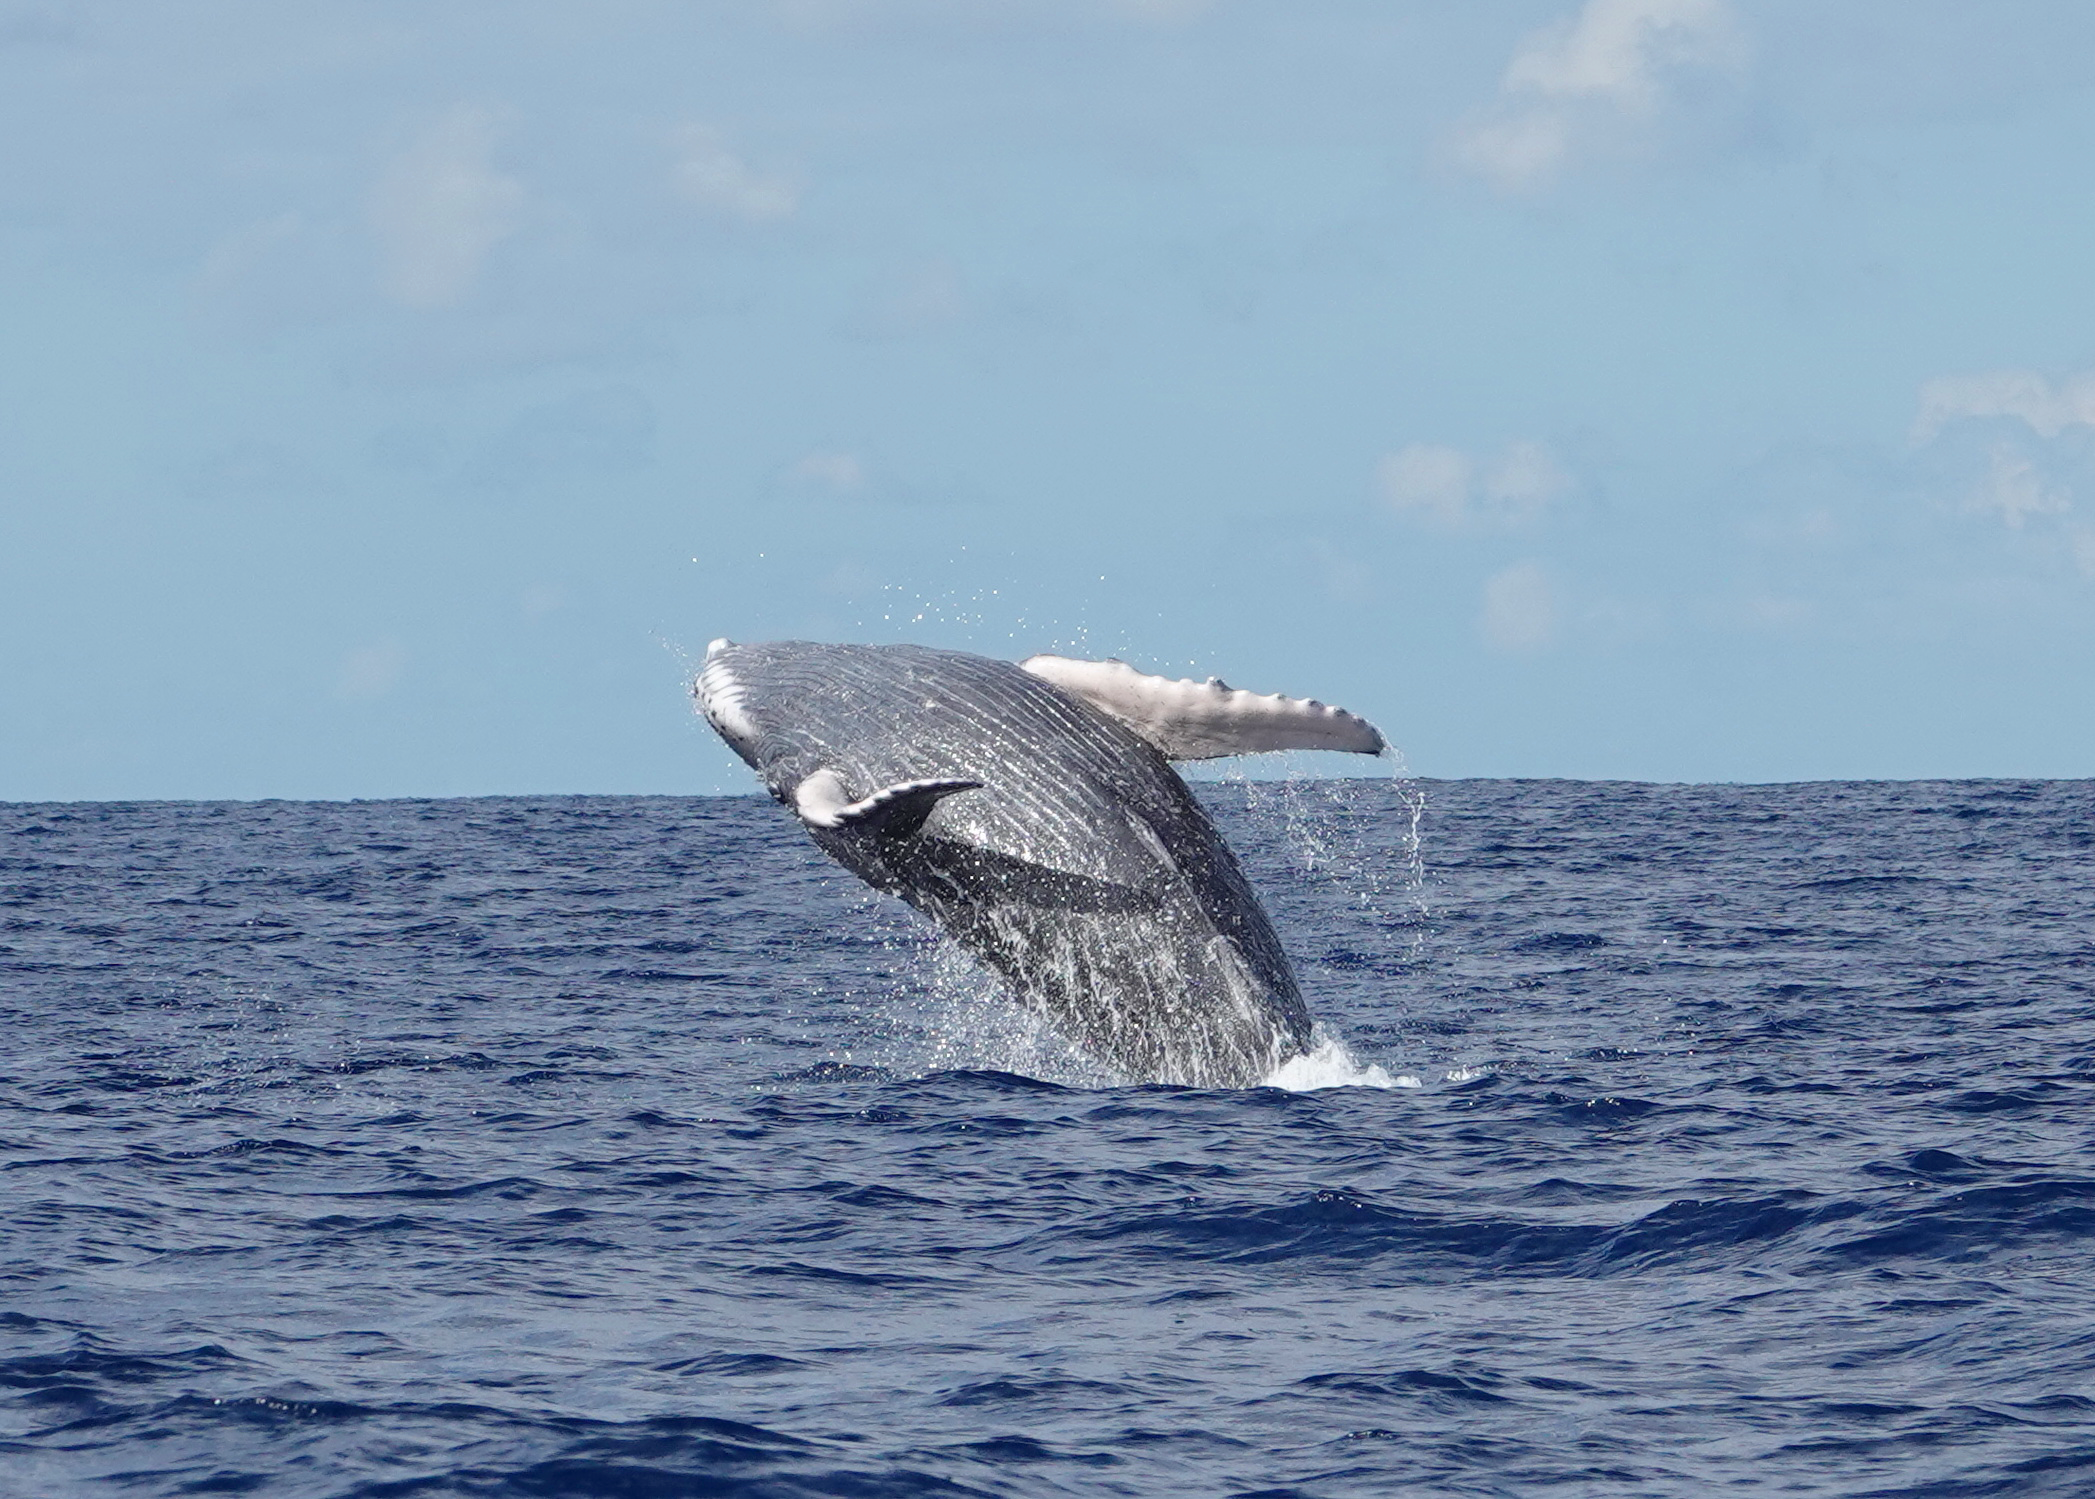 We see more humpback whales this year!